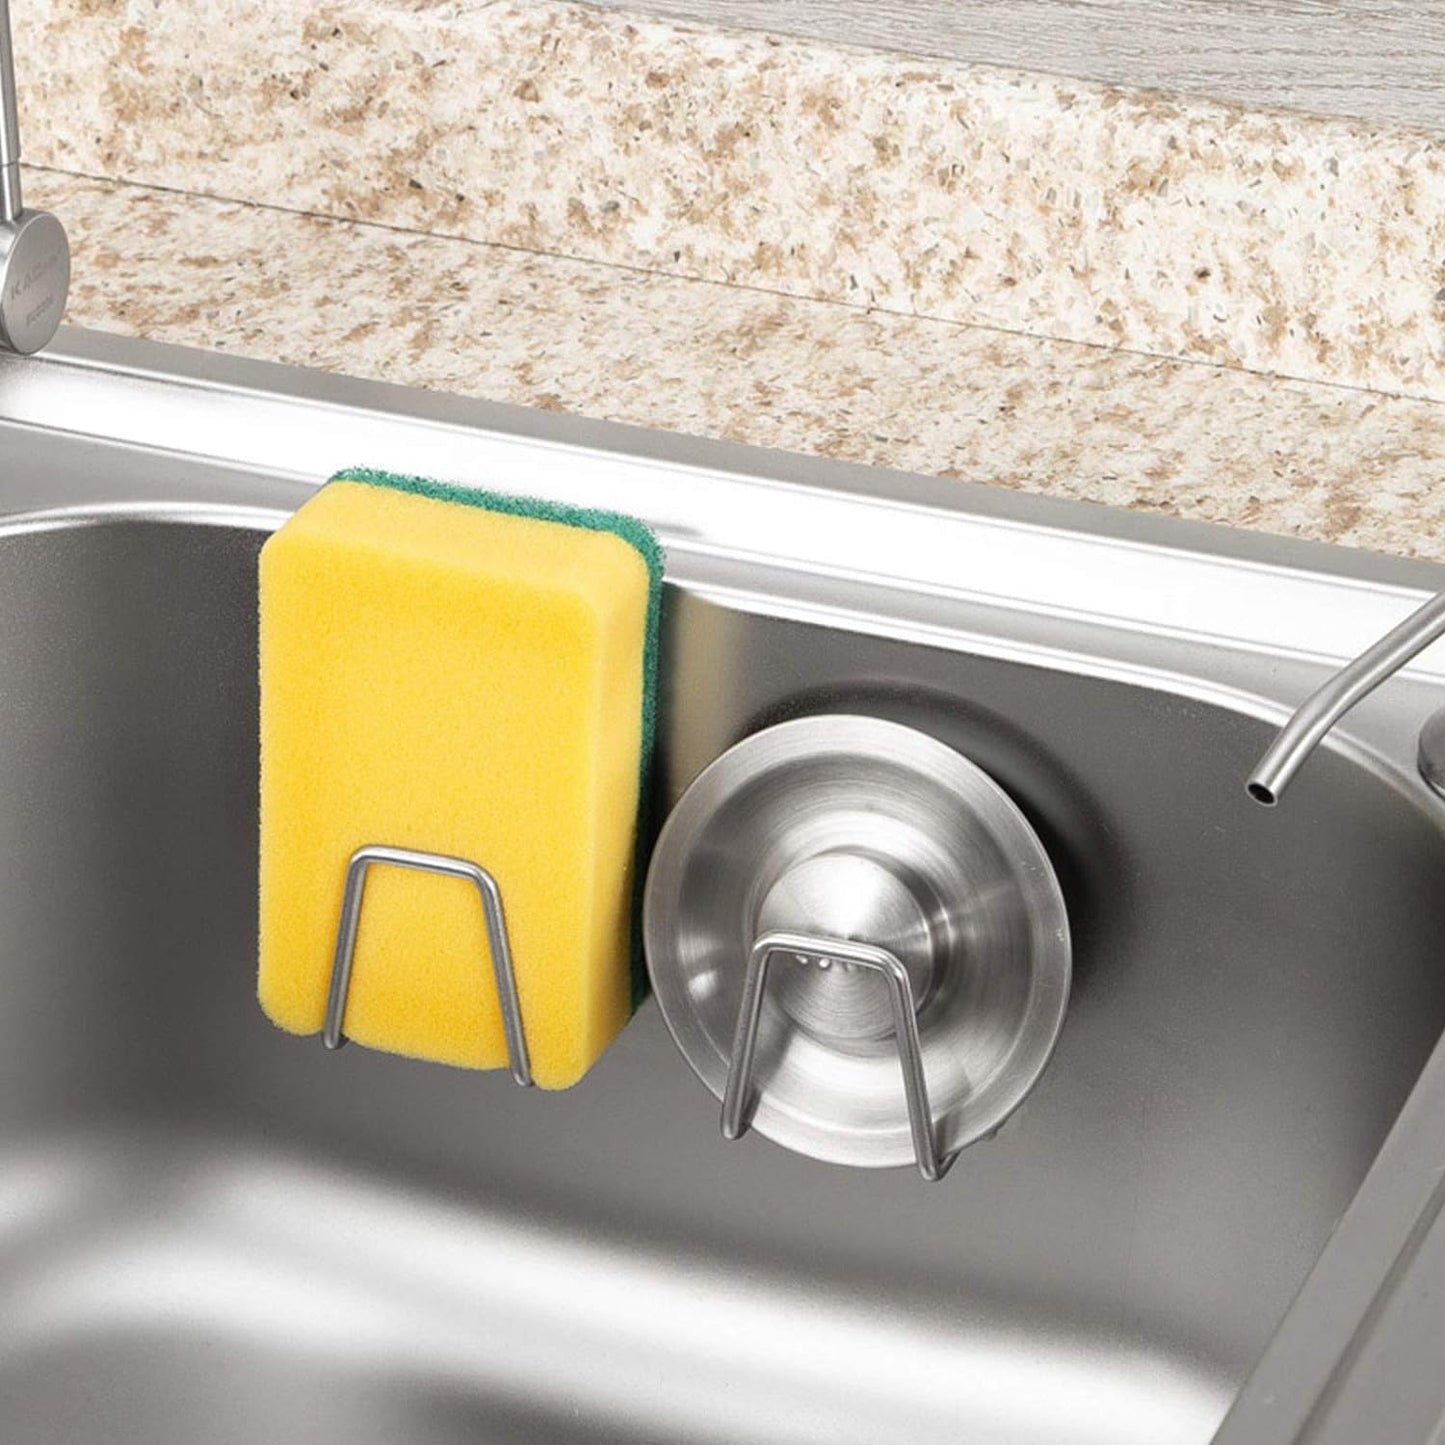 KD Adhesive Sponge Holder Sink Caddy for Kitchen Accessories Stainless Steel